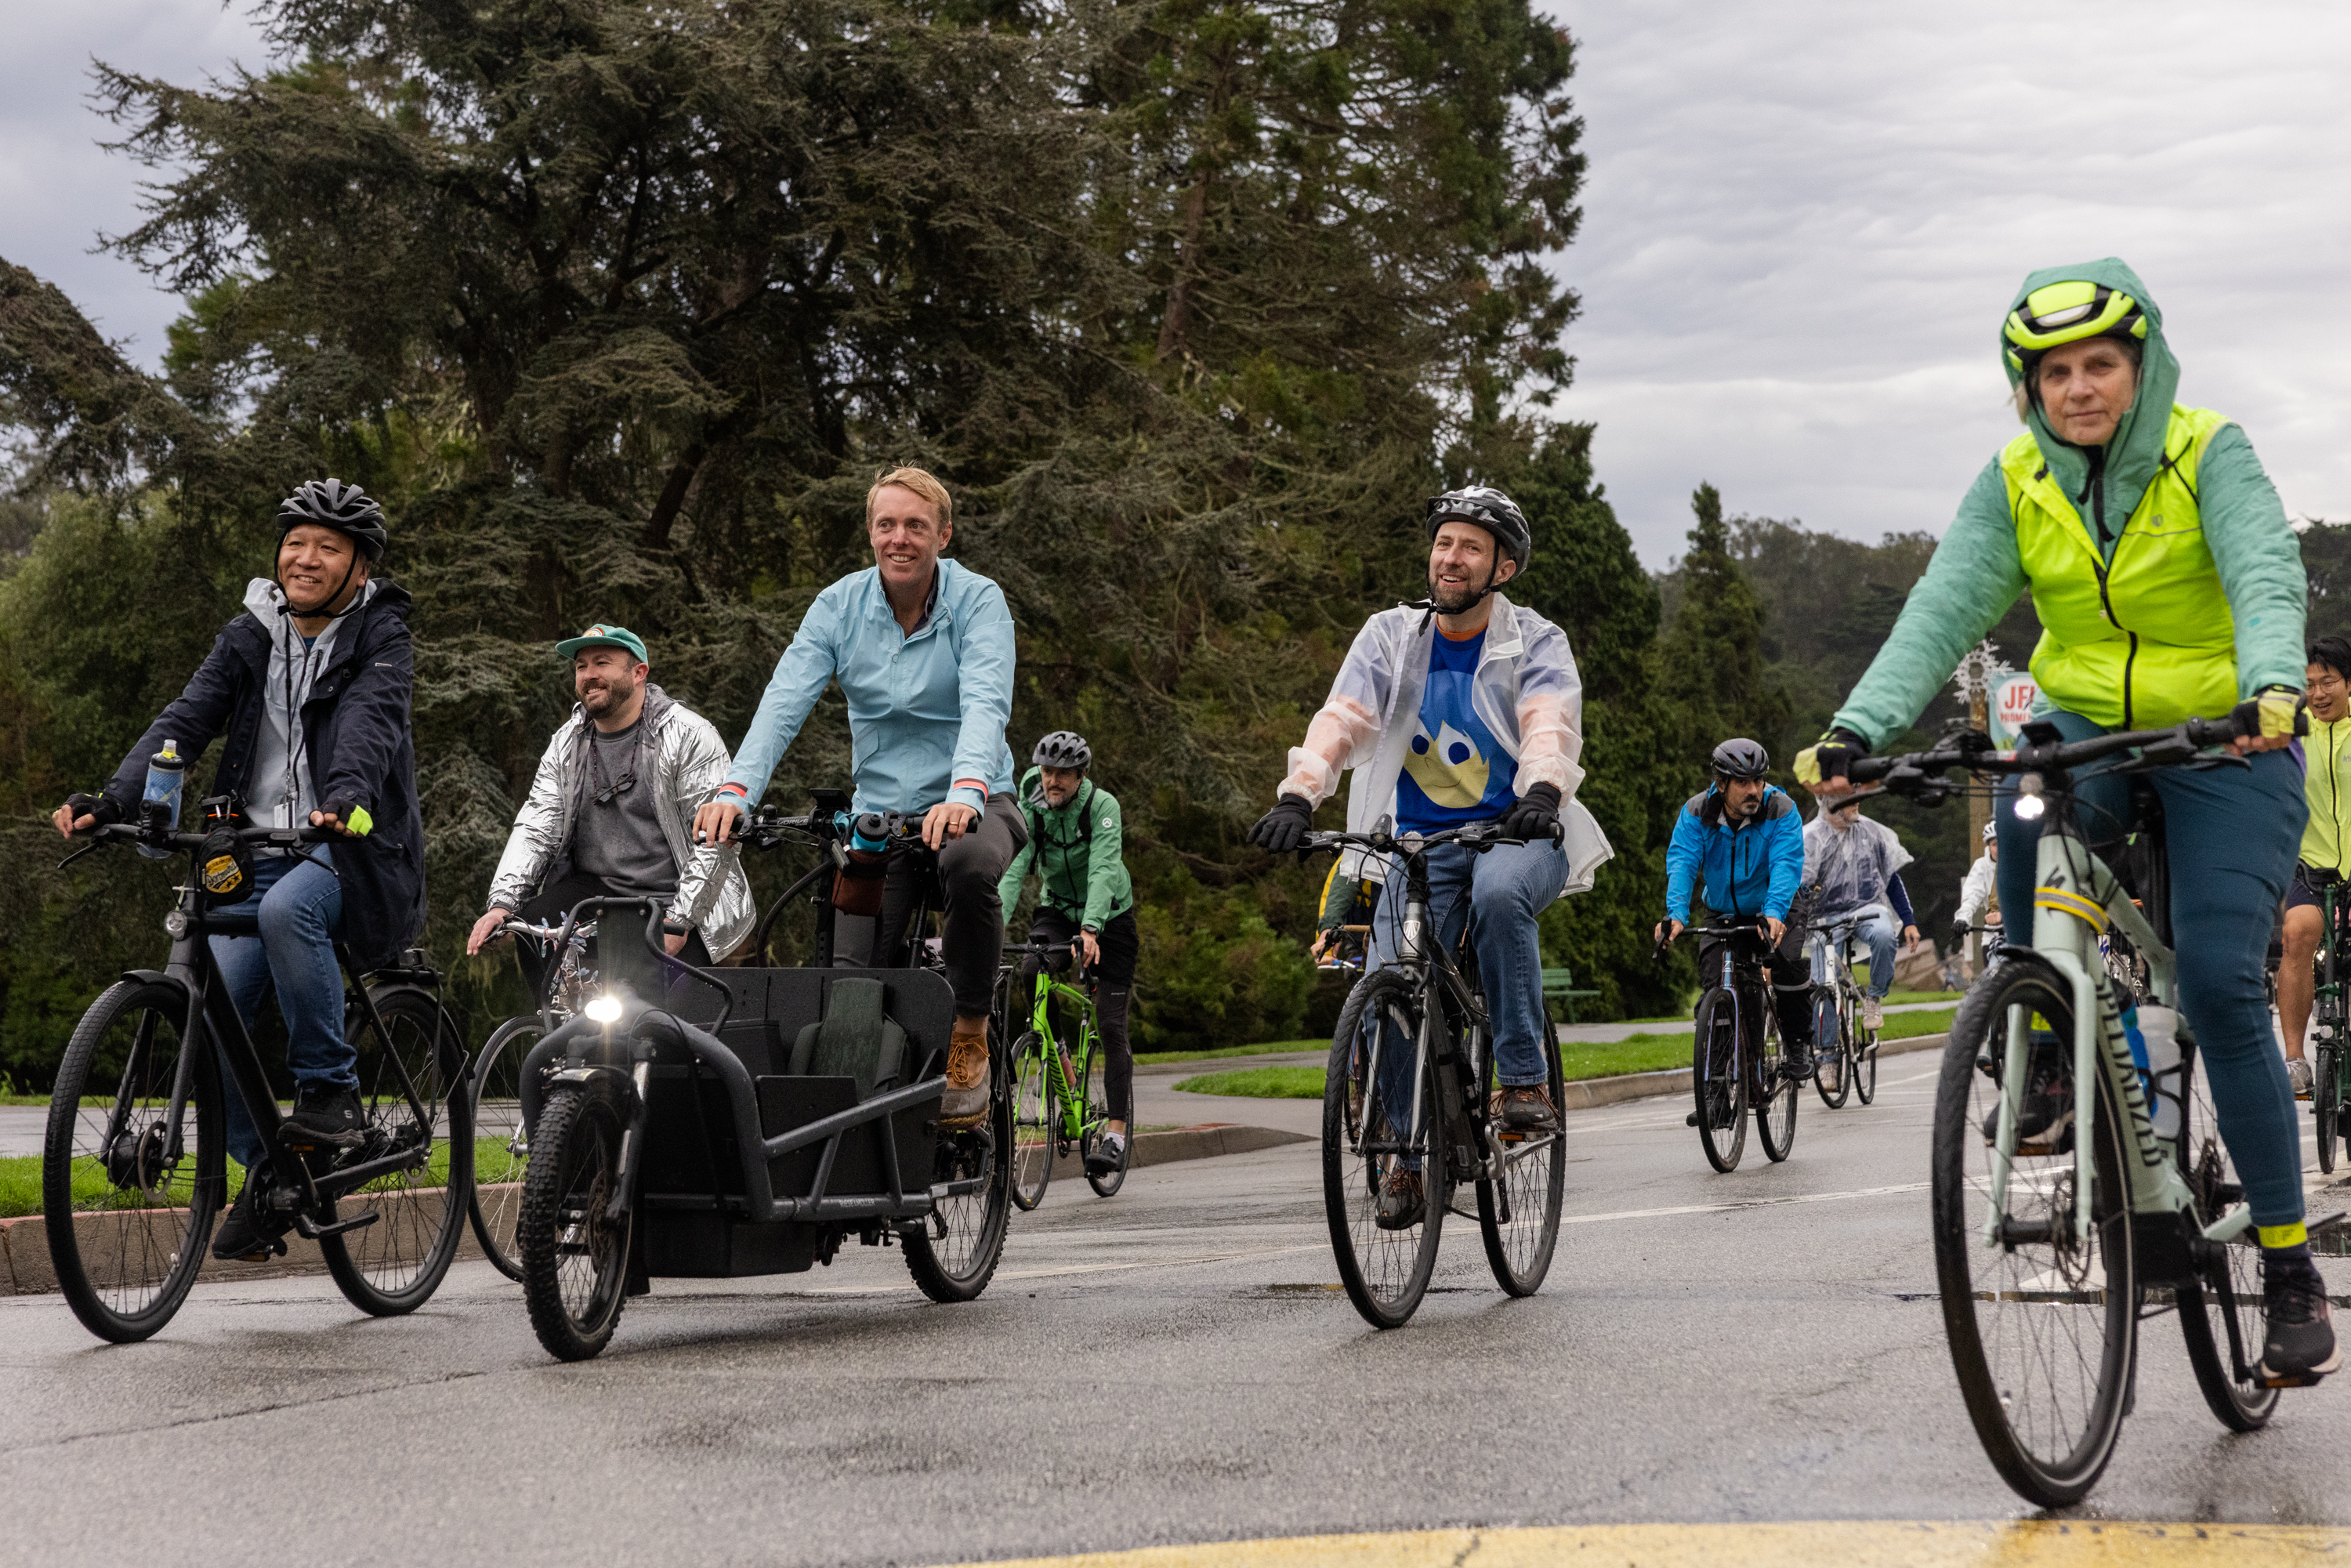 City Supervisor Joe Engardio rides his bike surrounded by other bikers through Golden Gate Park.